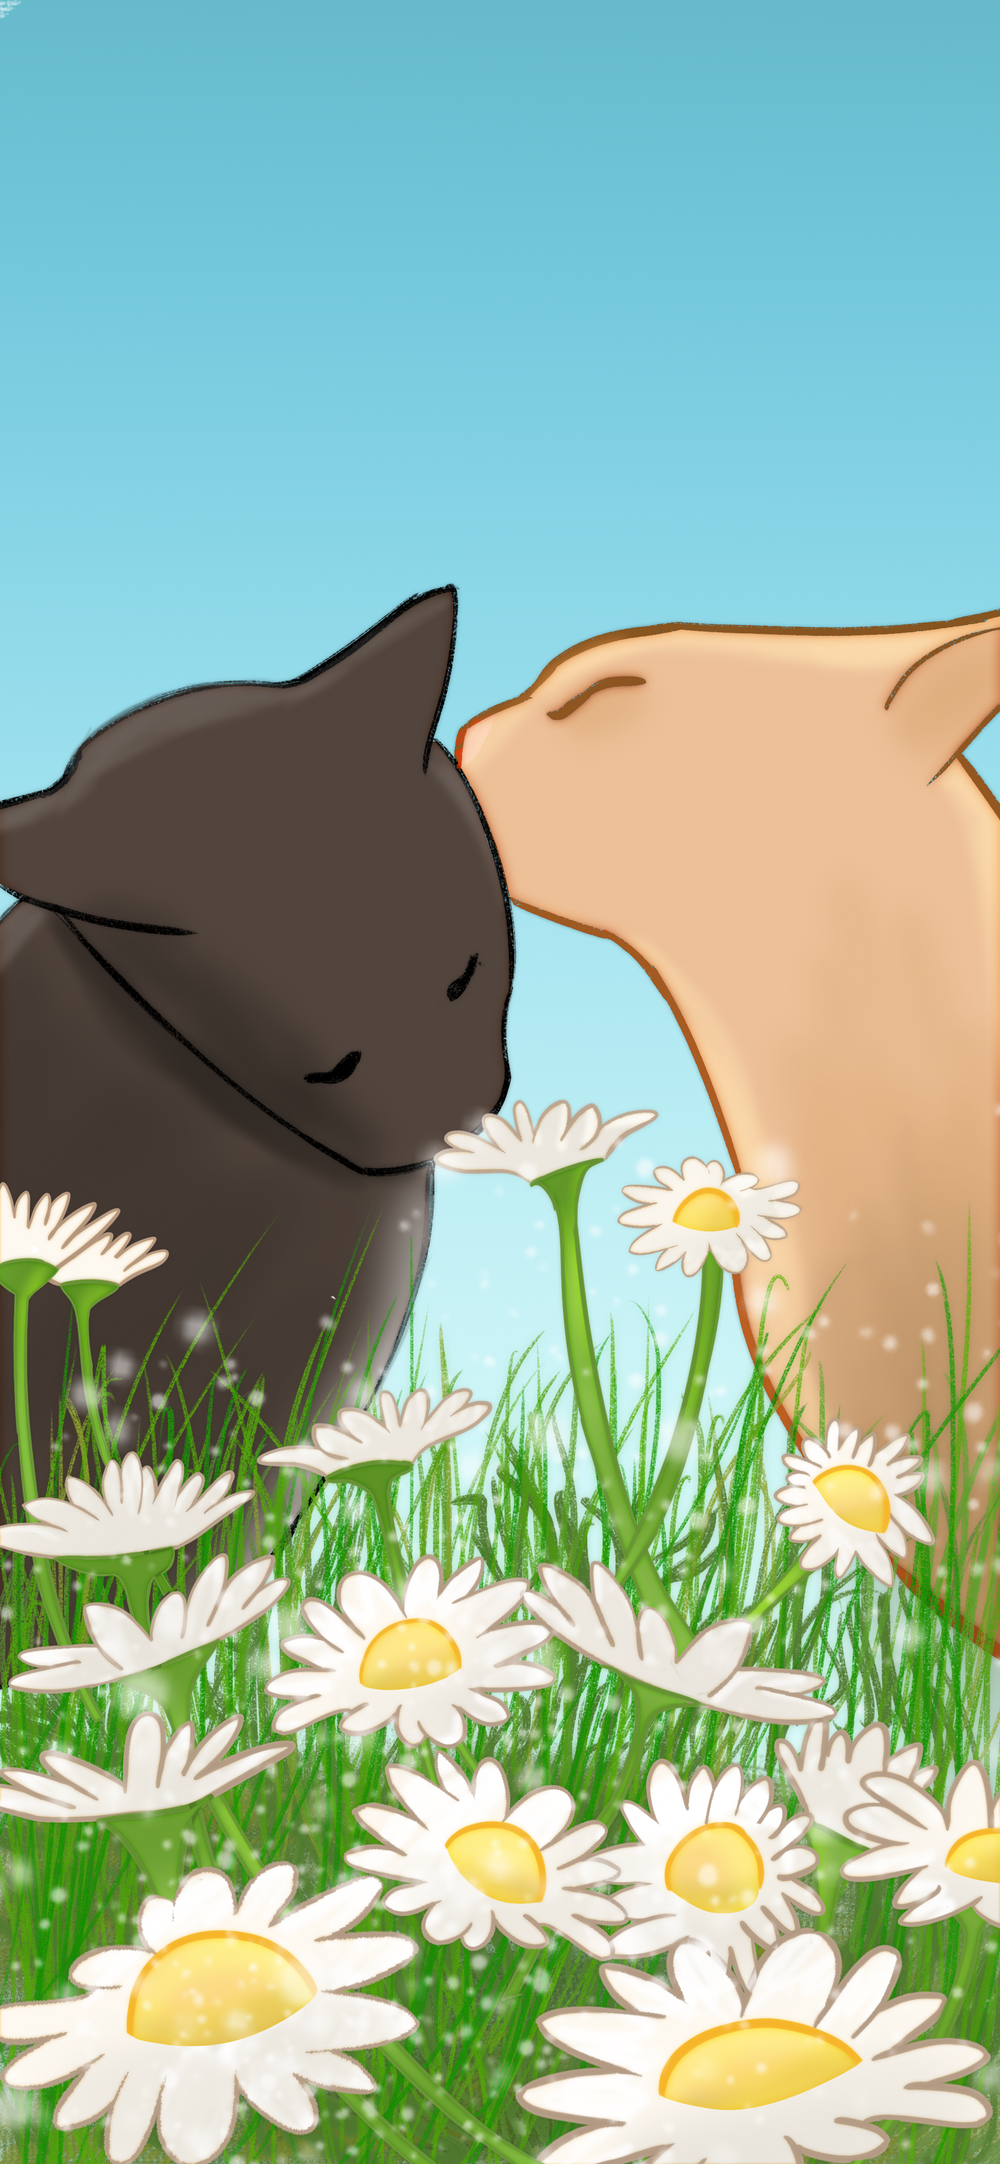 The background the hero of the website : a drawing of two cats kissing, with flowers in the foreground. The sky is blue.